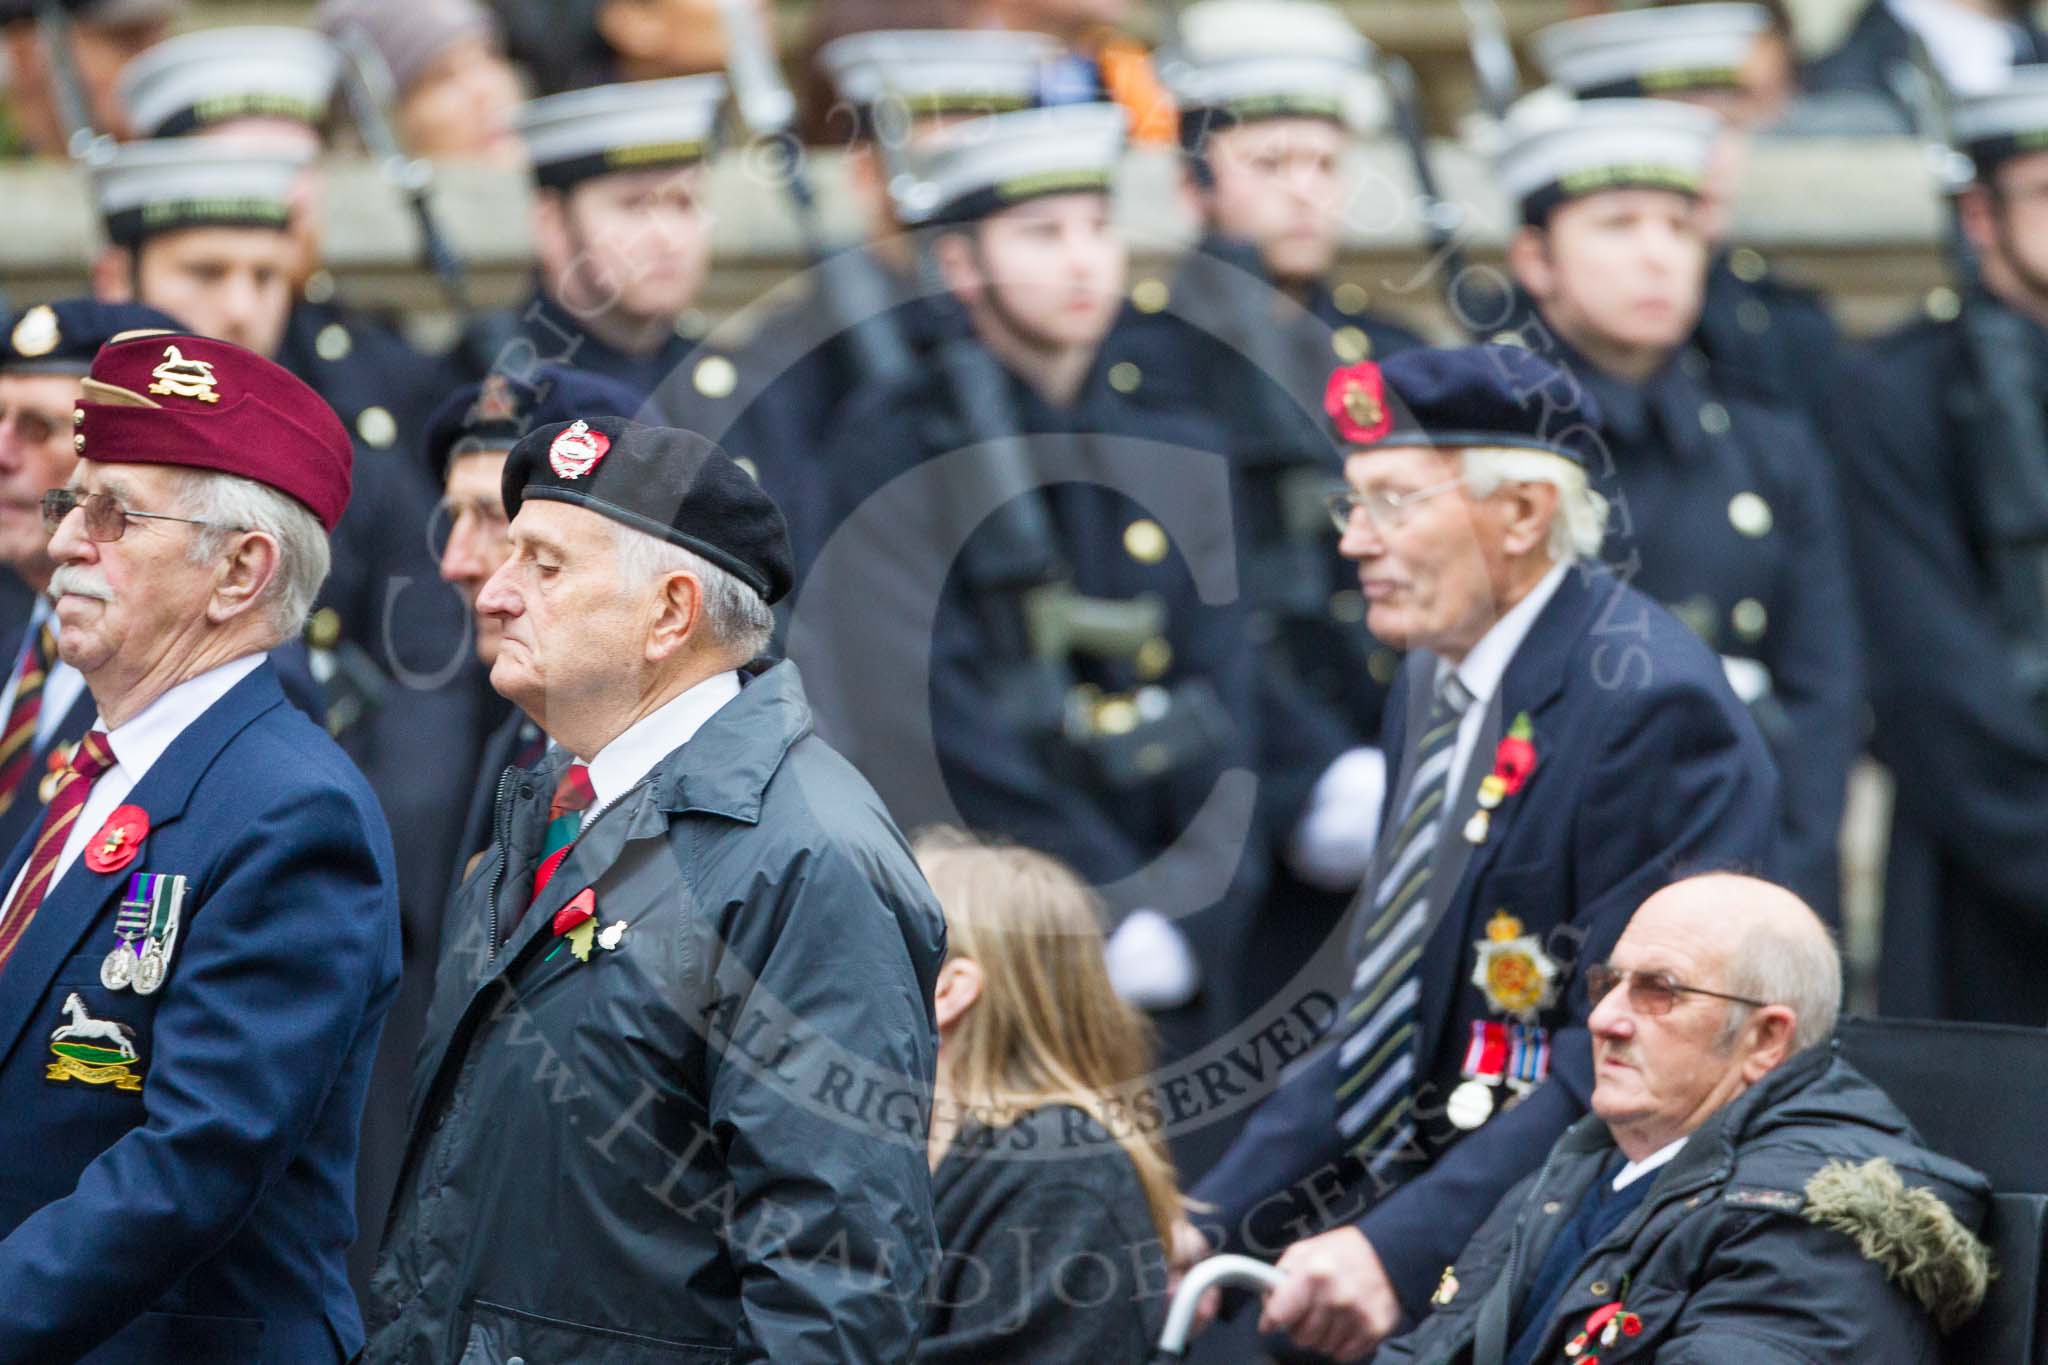 Remembrance Sunday at the Cenotaph 2015: Group F13, National Service Veterans Alliance.
Cenotaph, Whitehall, London SW1,
London,
Greater London,
United Kingdom,
on 08 November 2015 at 12:05, image #1062